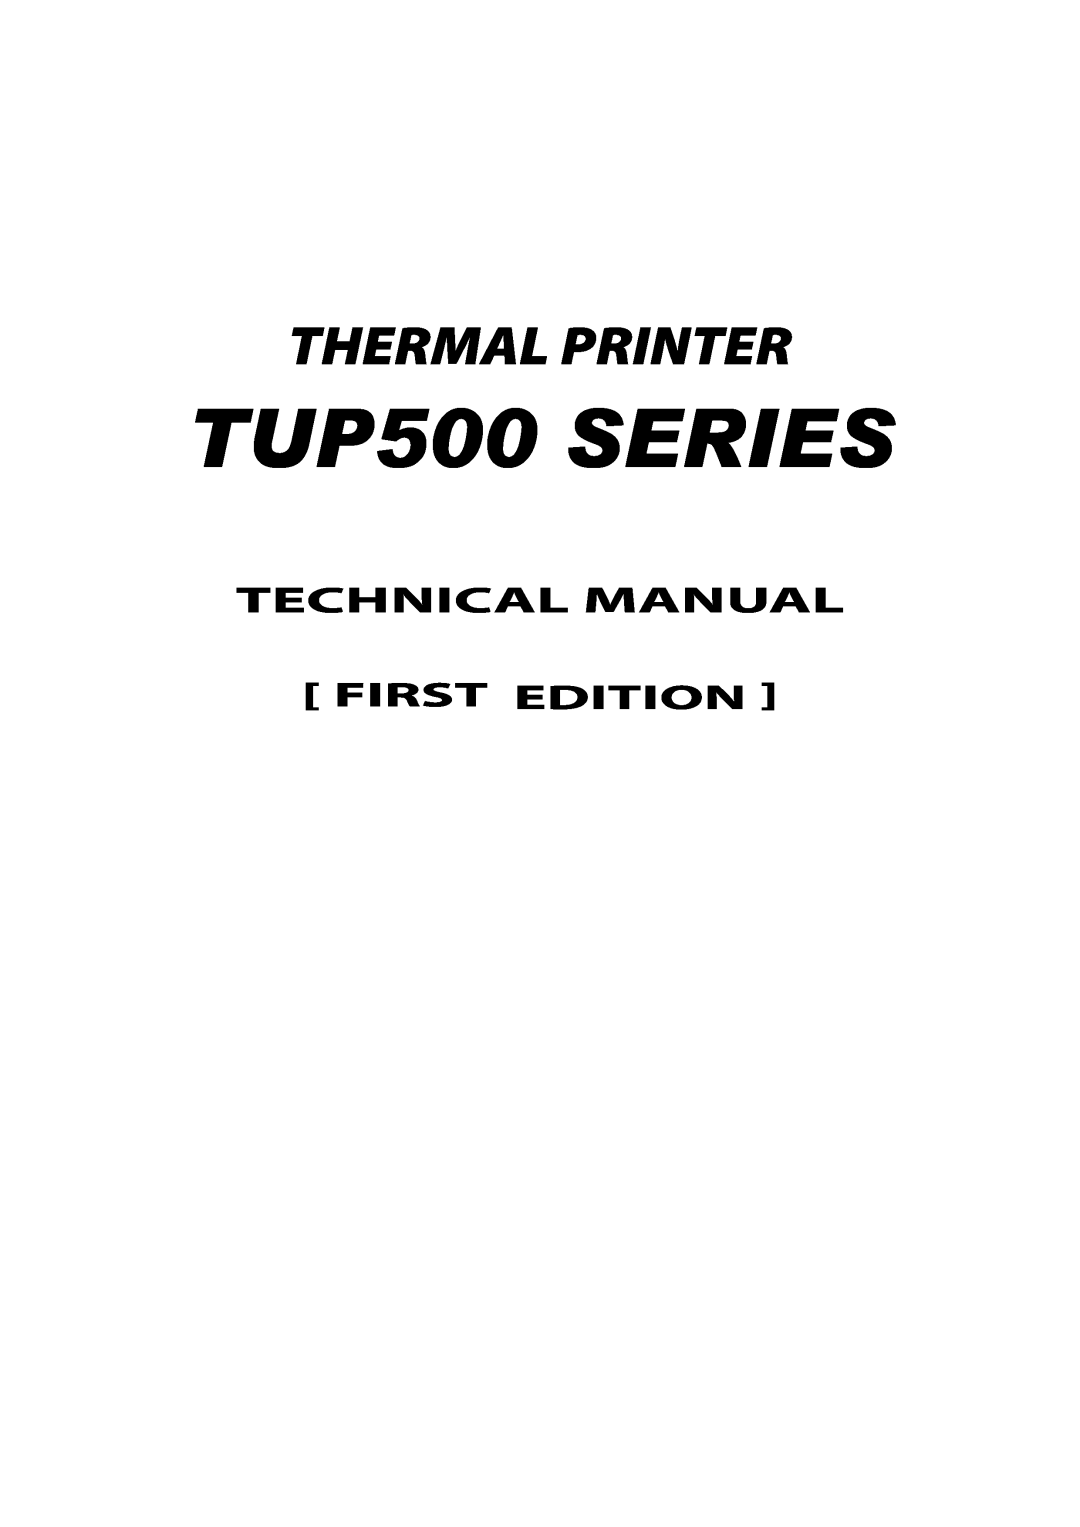 Star Micronics technical manual TUP500 SERIES, Thermal Printer, Technical Manual, First Edition 